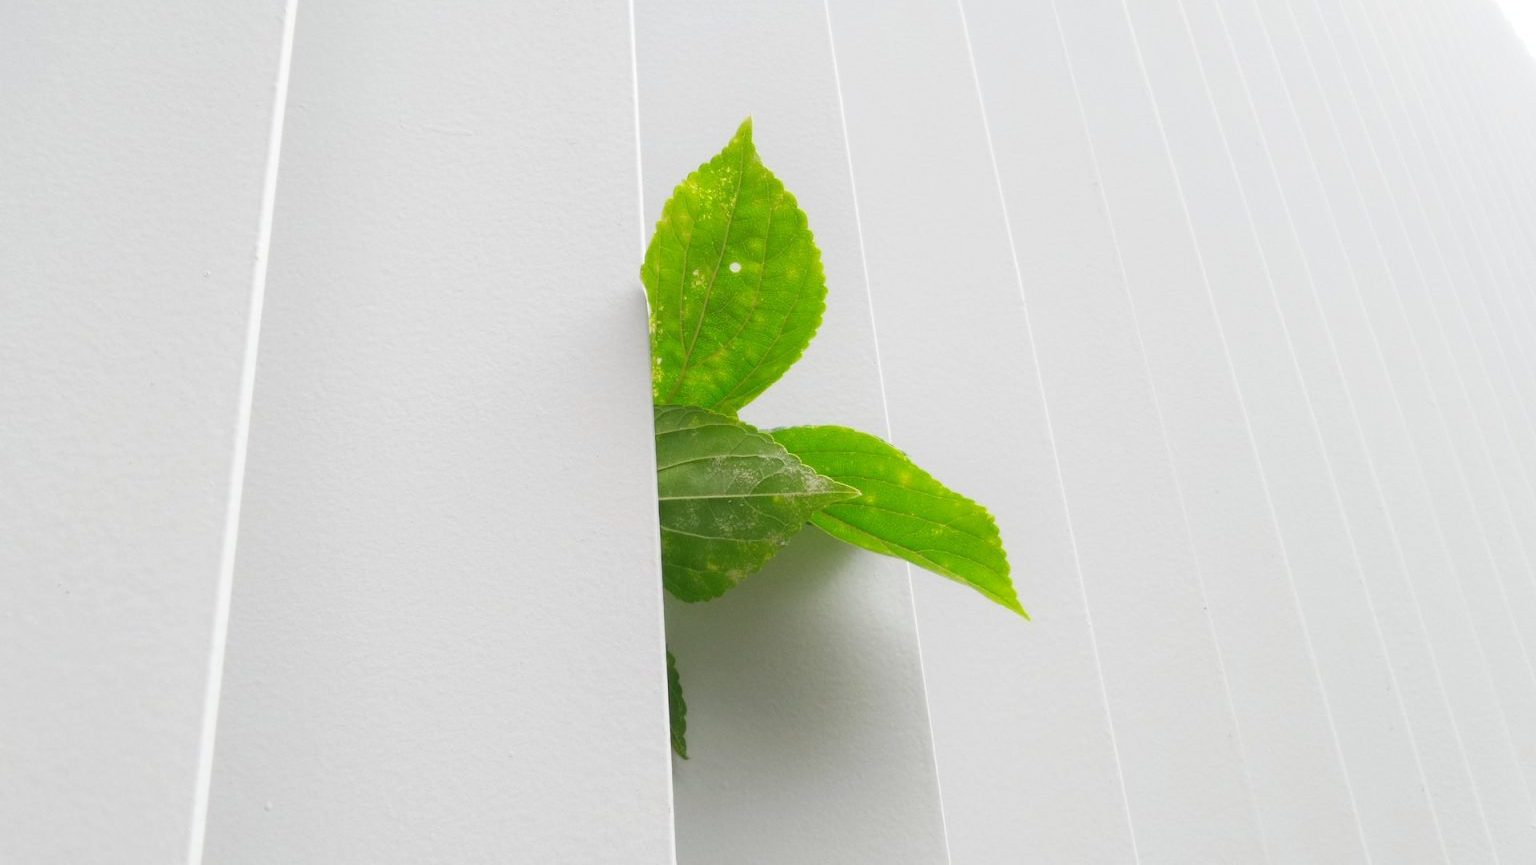 A green leaf peeking out of a white blind.